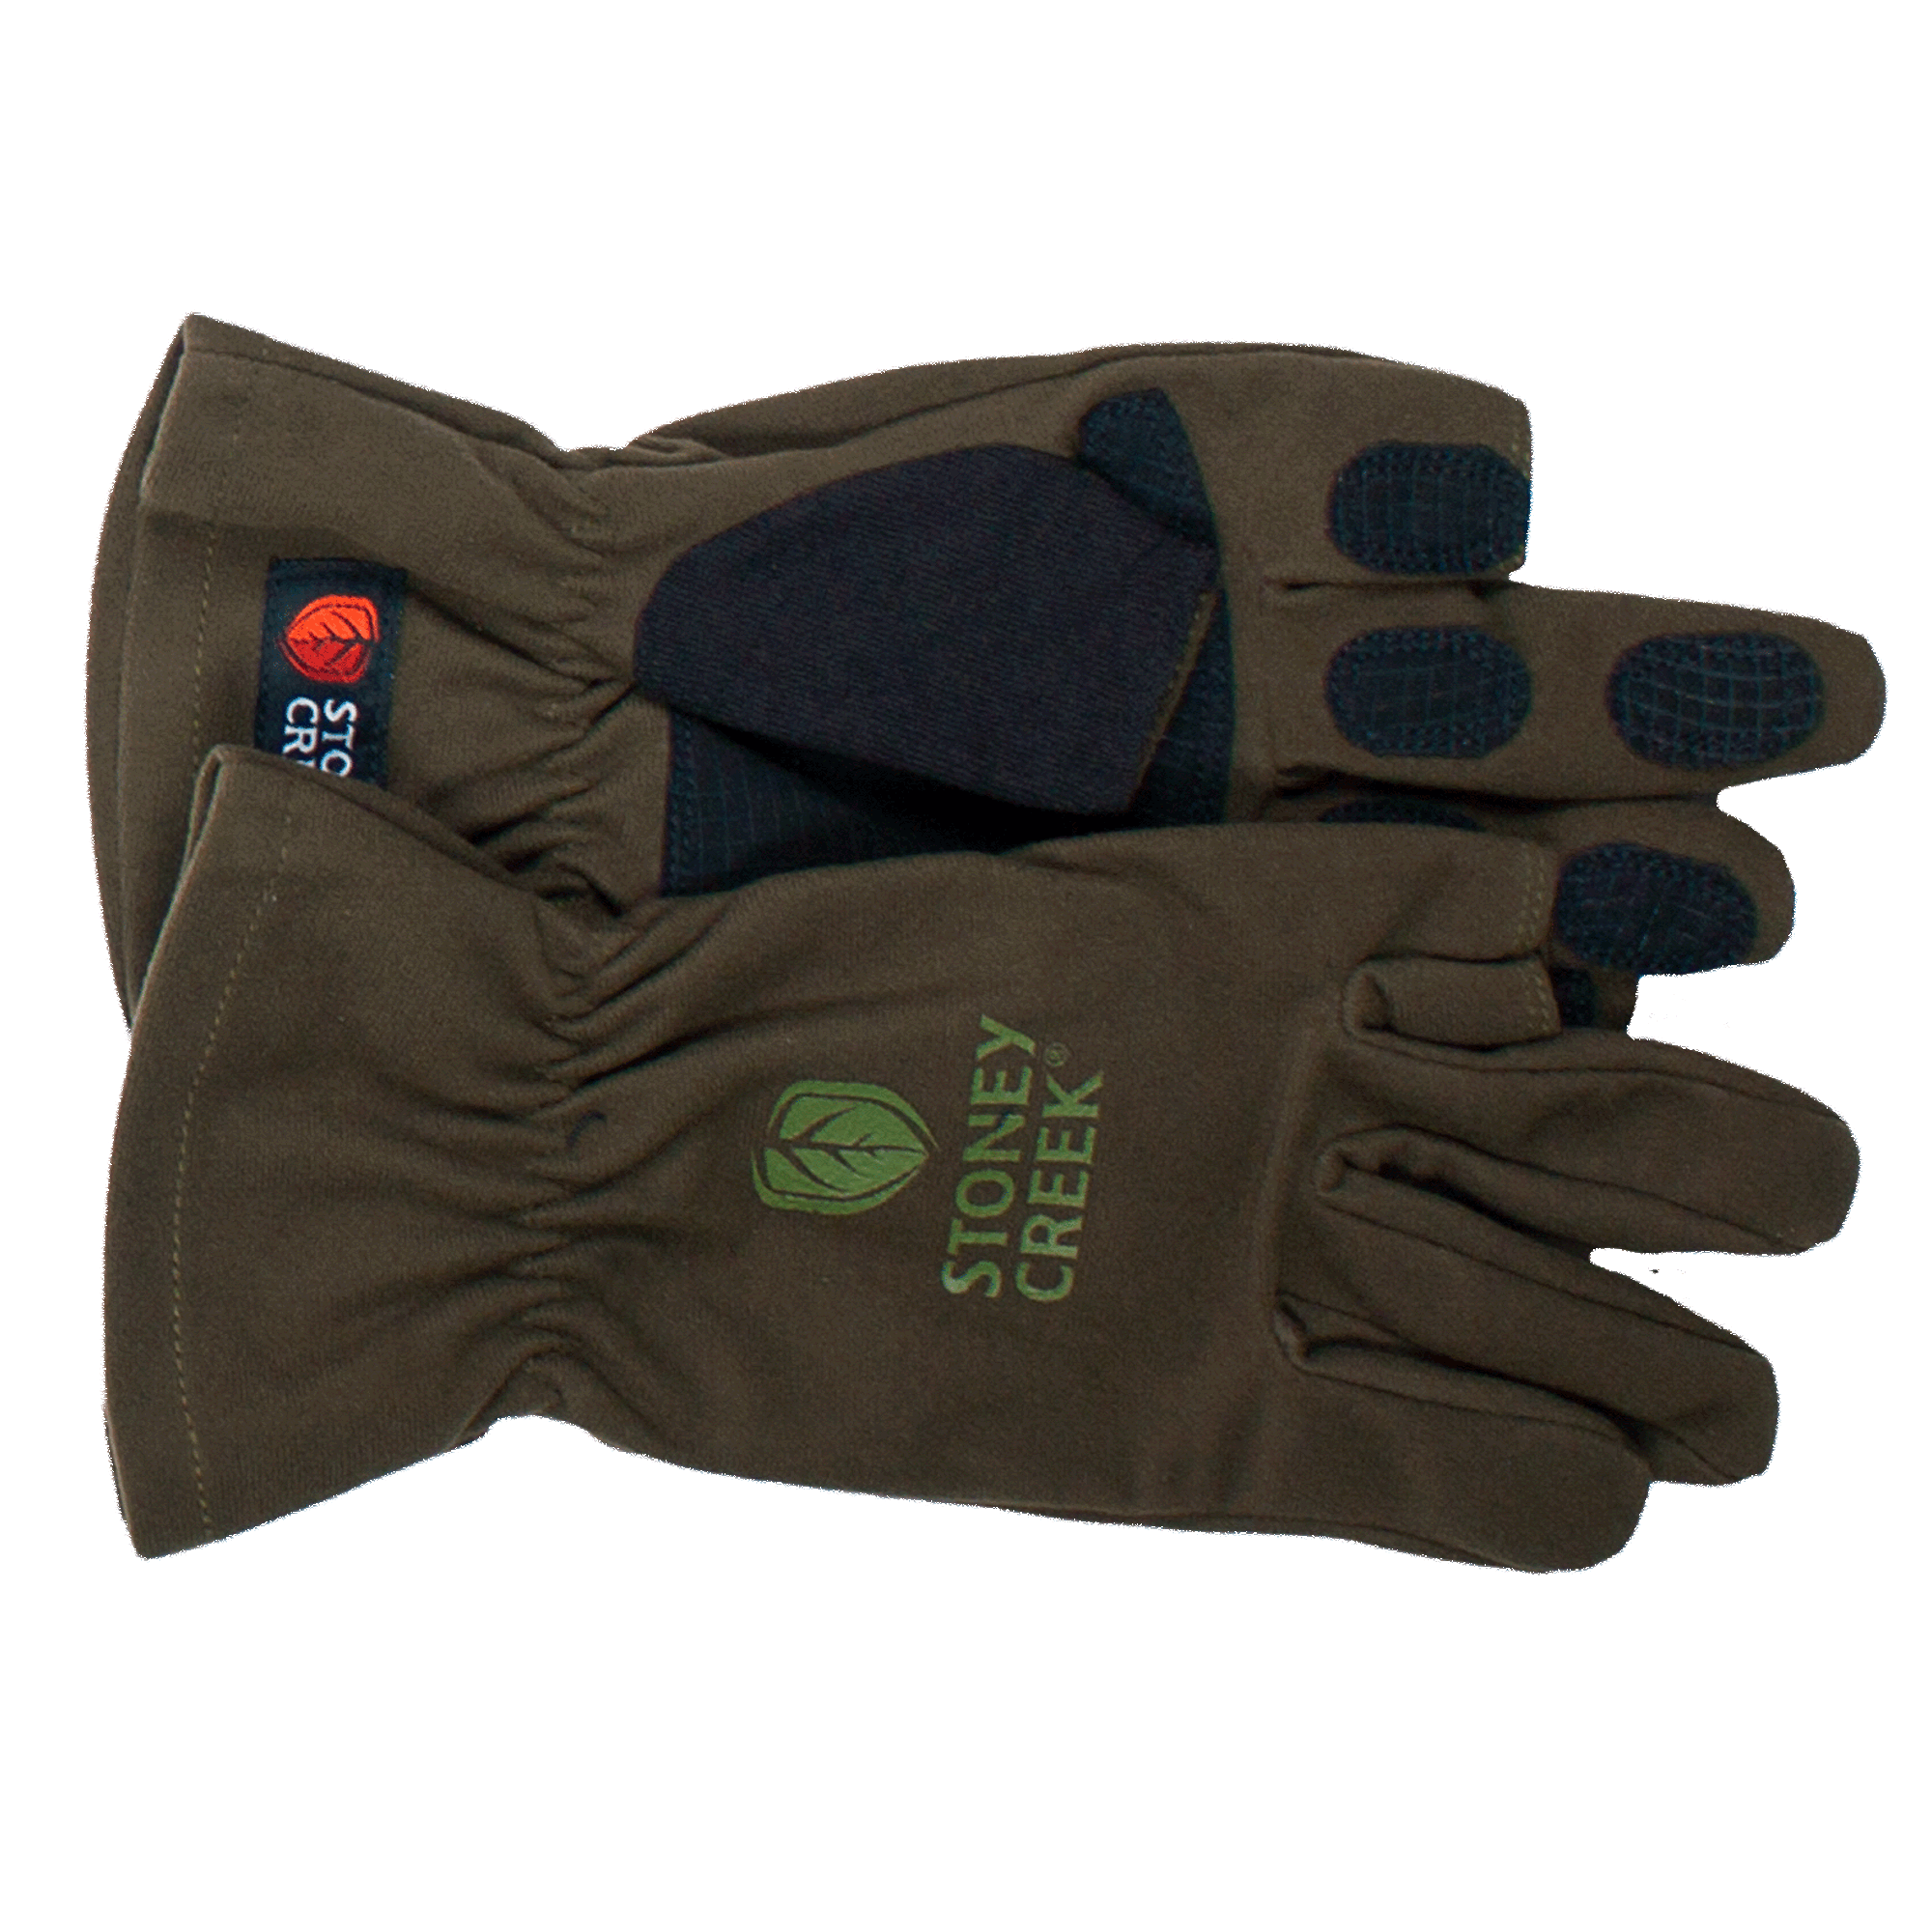 Stoney Creek Gloves All Season - L / BAYLEAF - Mansfield Hunting & Fishing - Products to prepare for Corona Virus